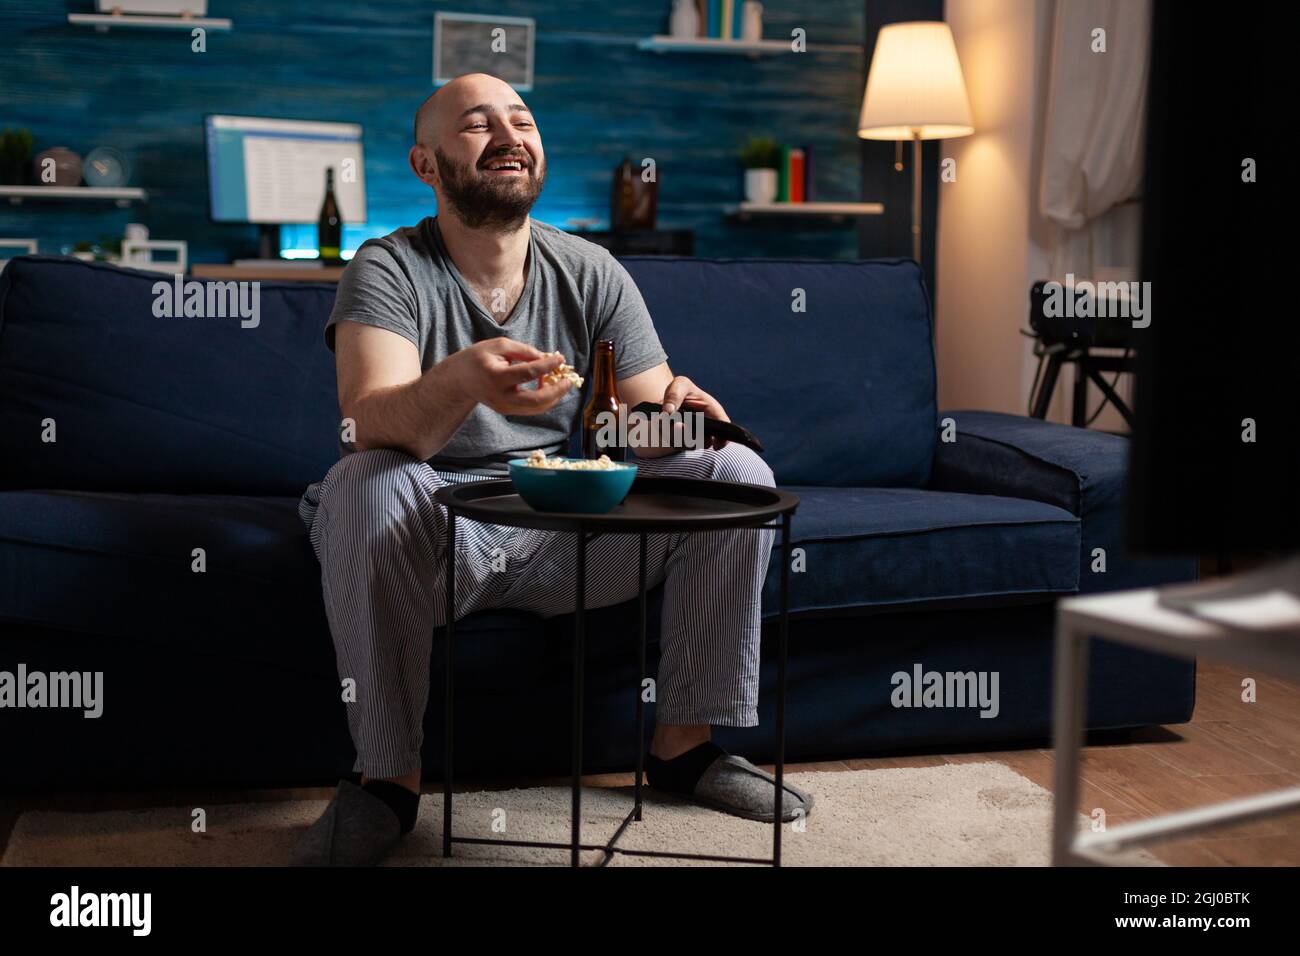 Man enjoying relax time watching tv comedy series at home sitting on comfortable couch dressed in pajamas eating popcorn. Excited amused home alone male relaxing on cozy sofa in living room late night Stock Photo